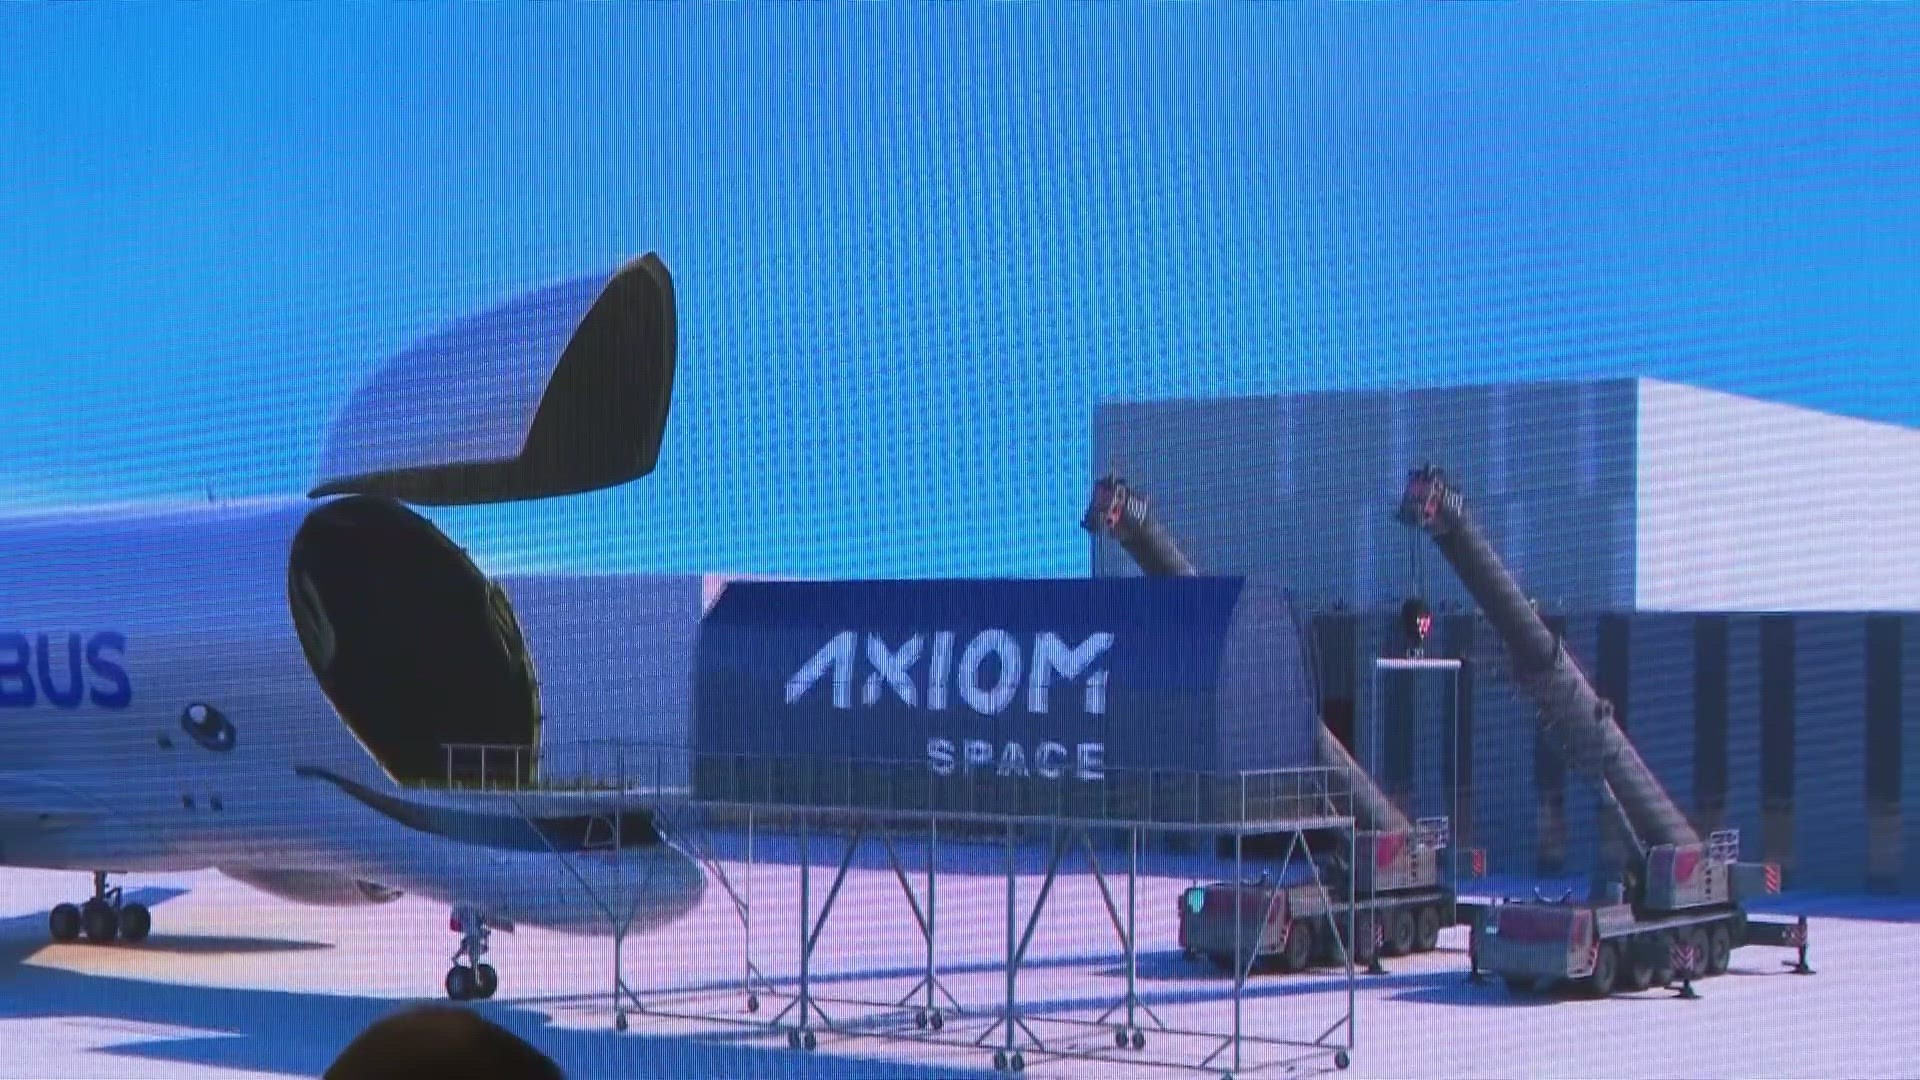 Axiom Space cut the ribbon on its new, long-term headquarters Thursday (12/7) at Ellington Airport.